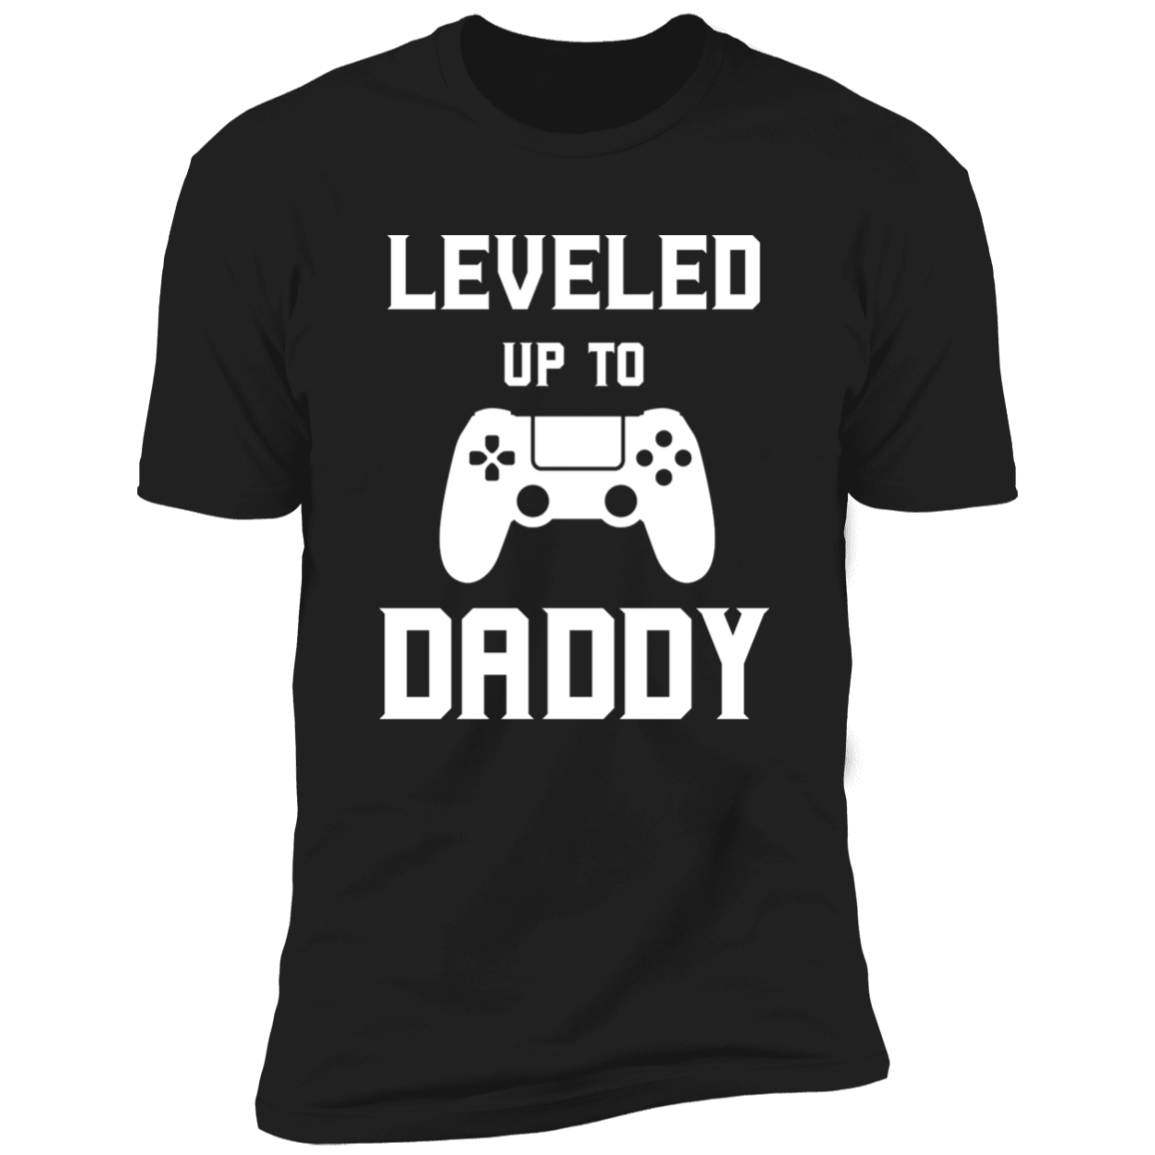 Leveled Up to Daddy T-Shirt